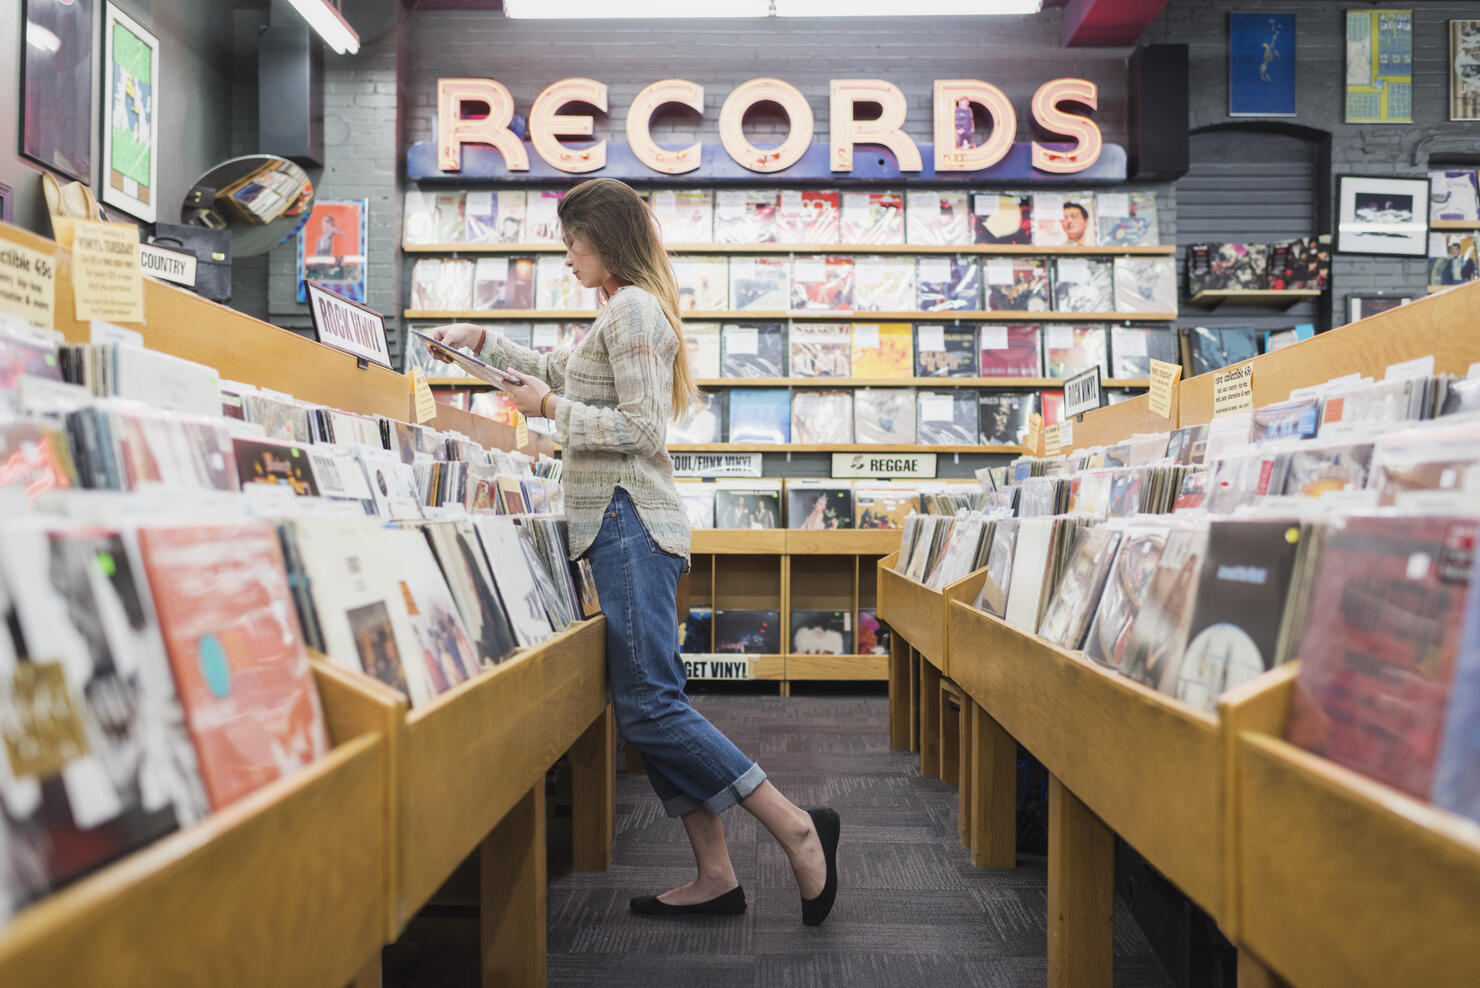 Teenage girl in record store shopping for music